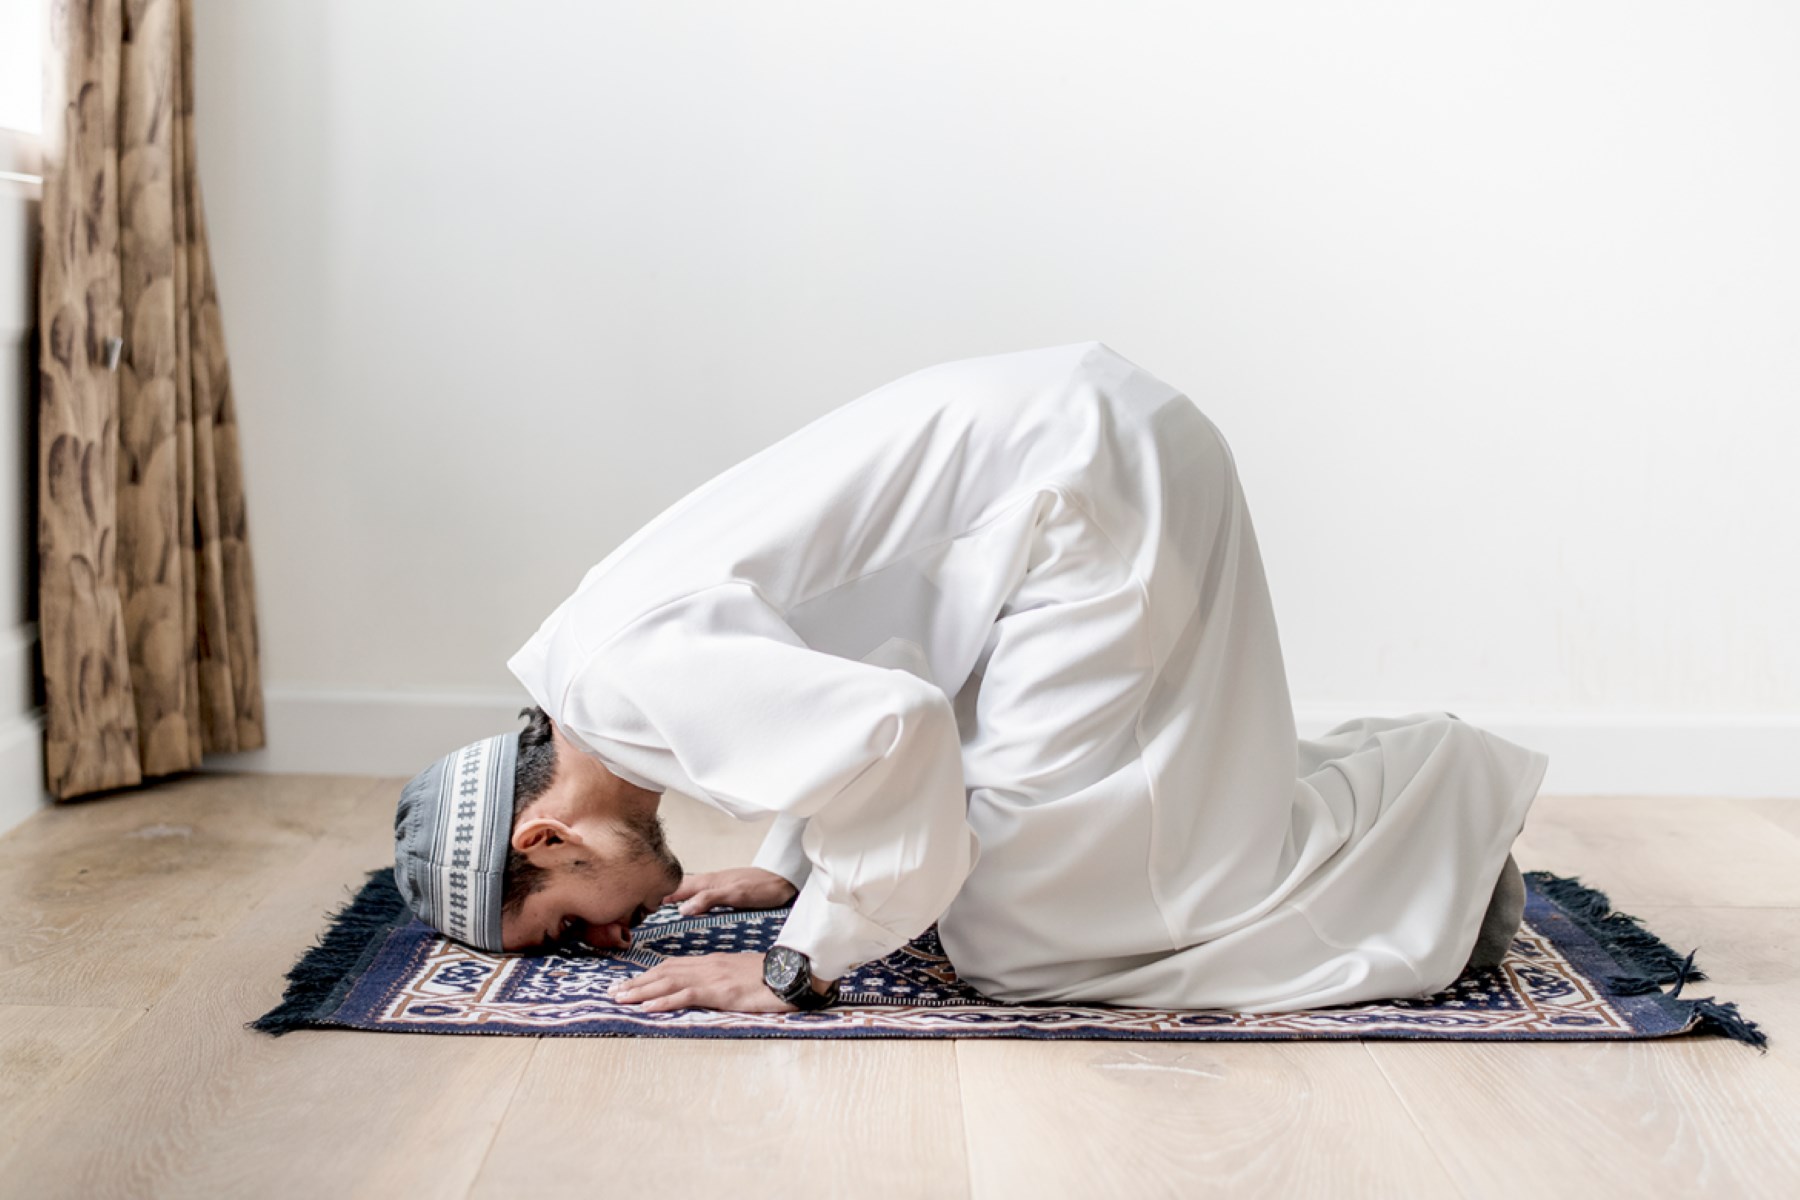 Why Do Muslims Pray On Rugs